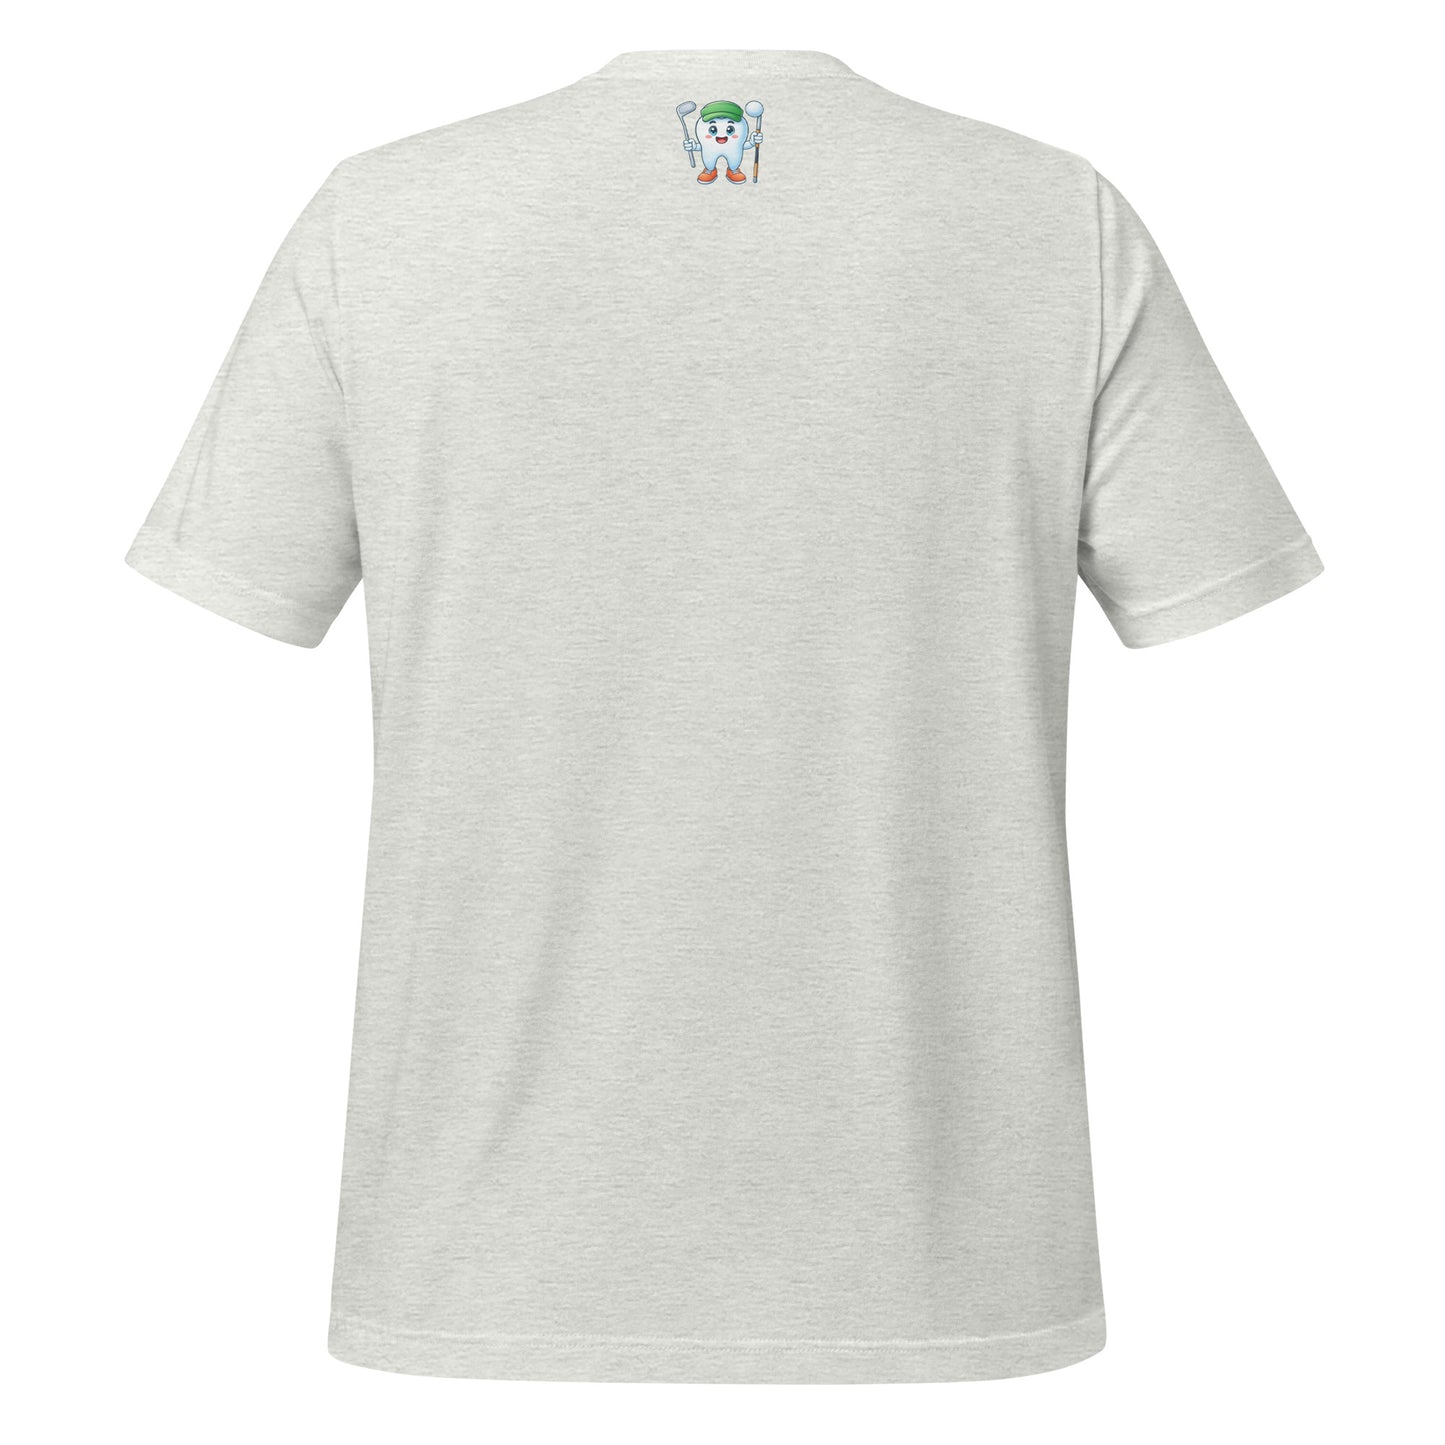 Cute dentist t-shirt showcasing an adorable tooth character in golf attire, joyfully celebrating a ‘hole in one’ achievement, perfect for dentist and dental professionals seeking unique and thematic dental apparel. Ash color, back view.